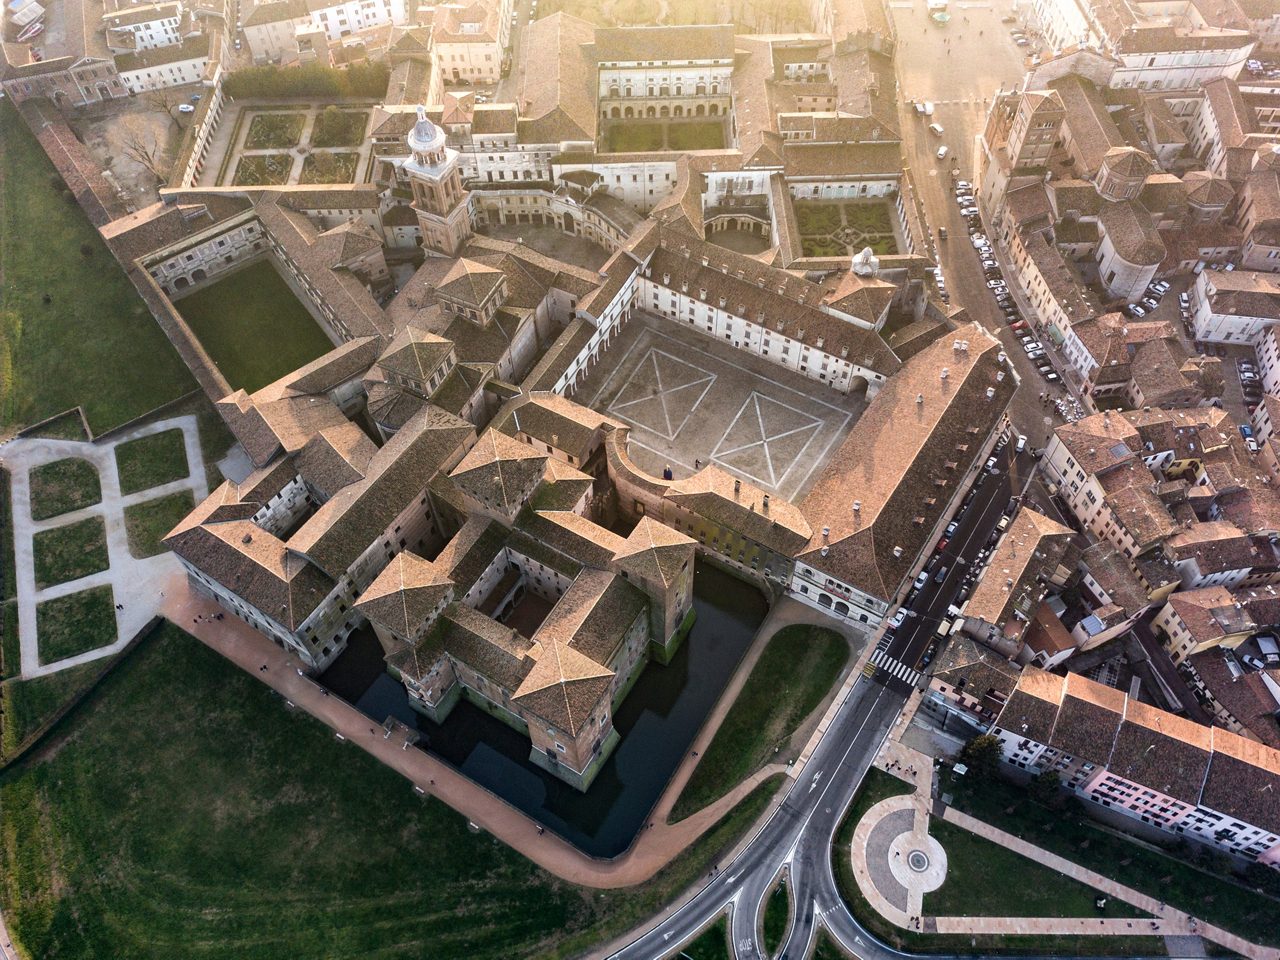 Italy, January 2020 - aerial view of the Ducal Palace of Mantua